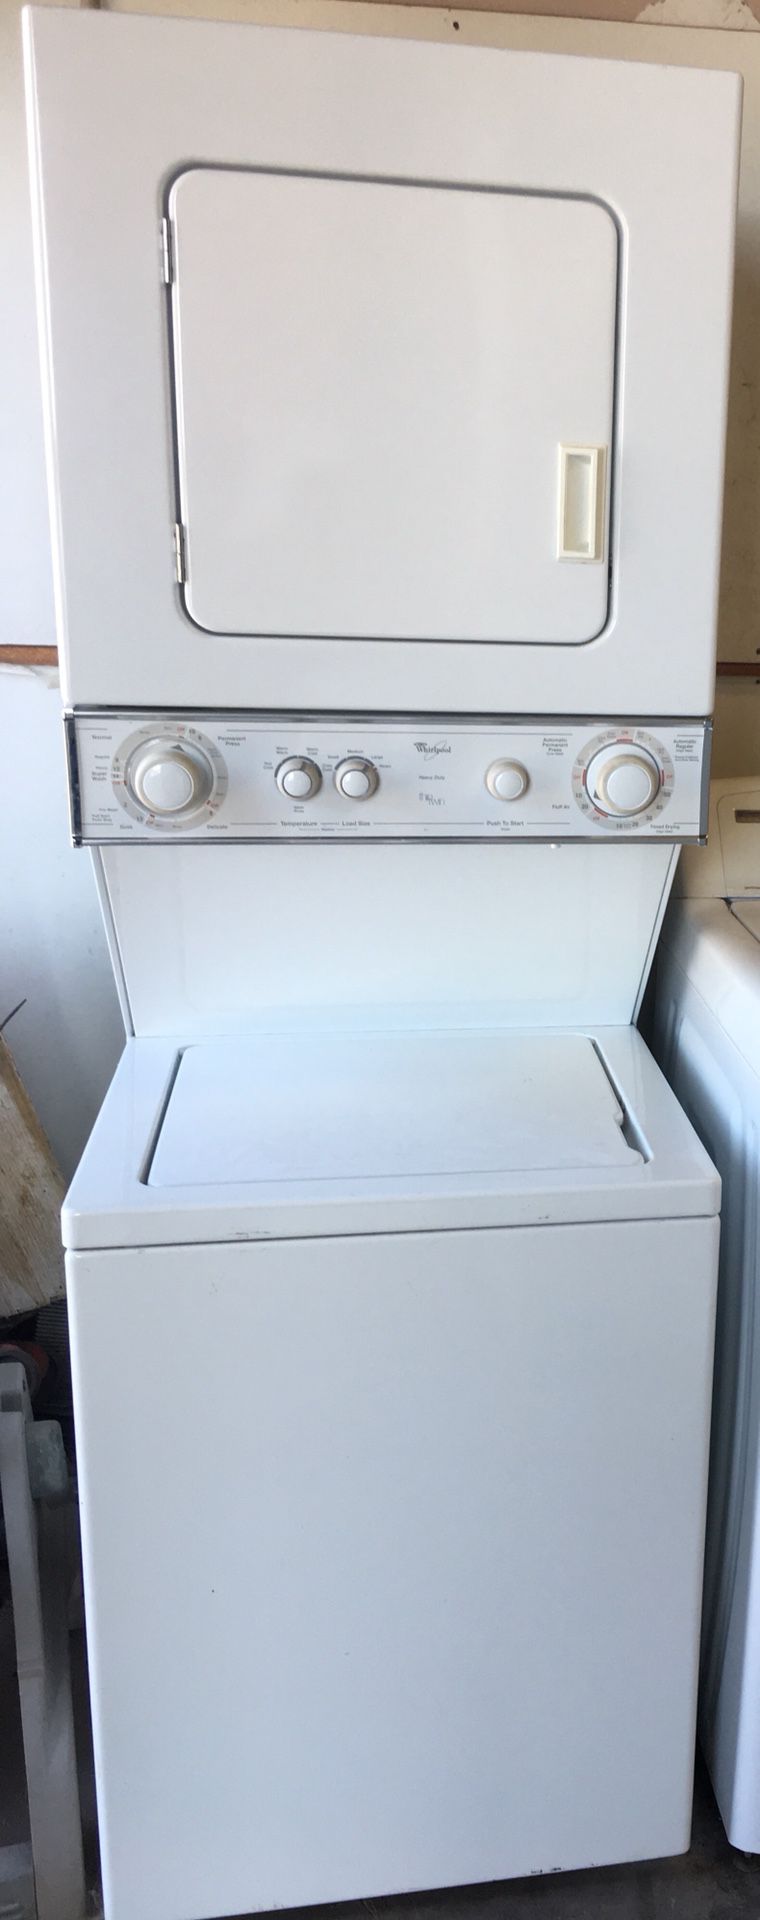 24”Whirlpool Stackable Dryer Electric